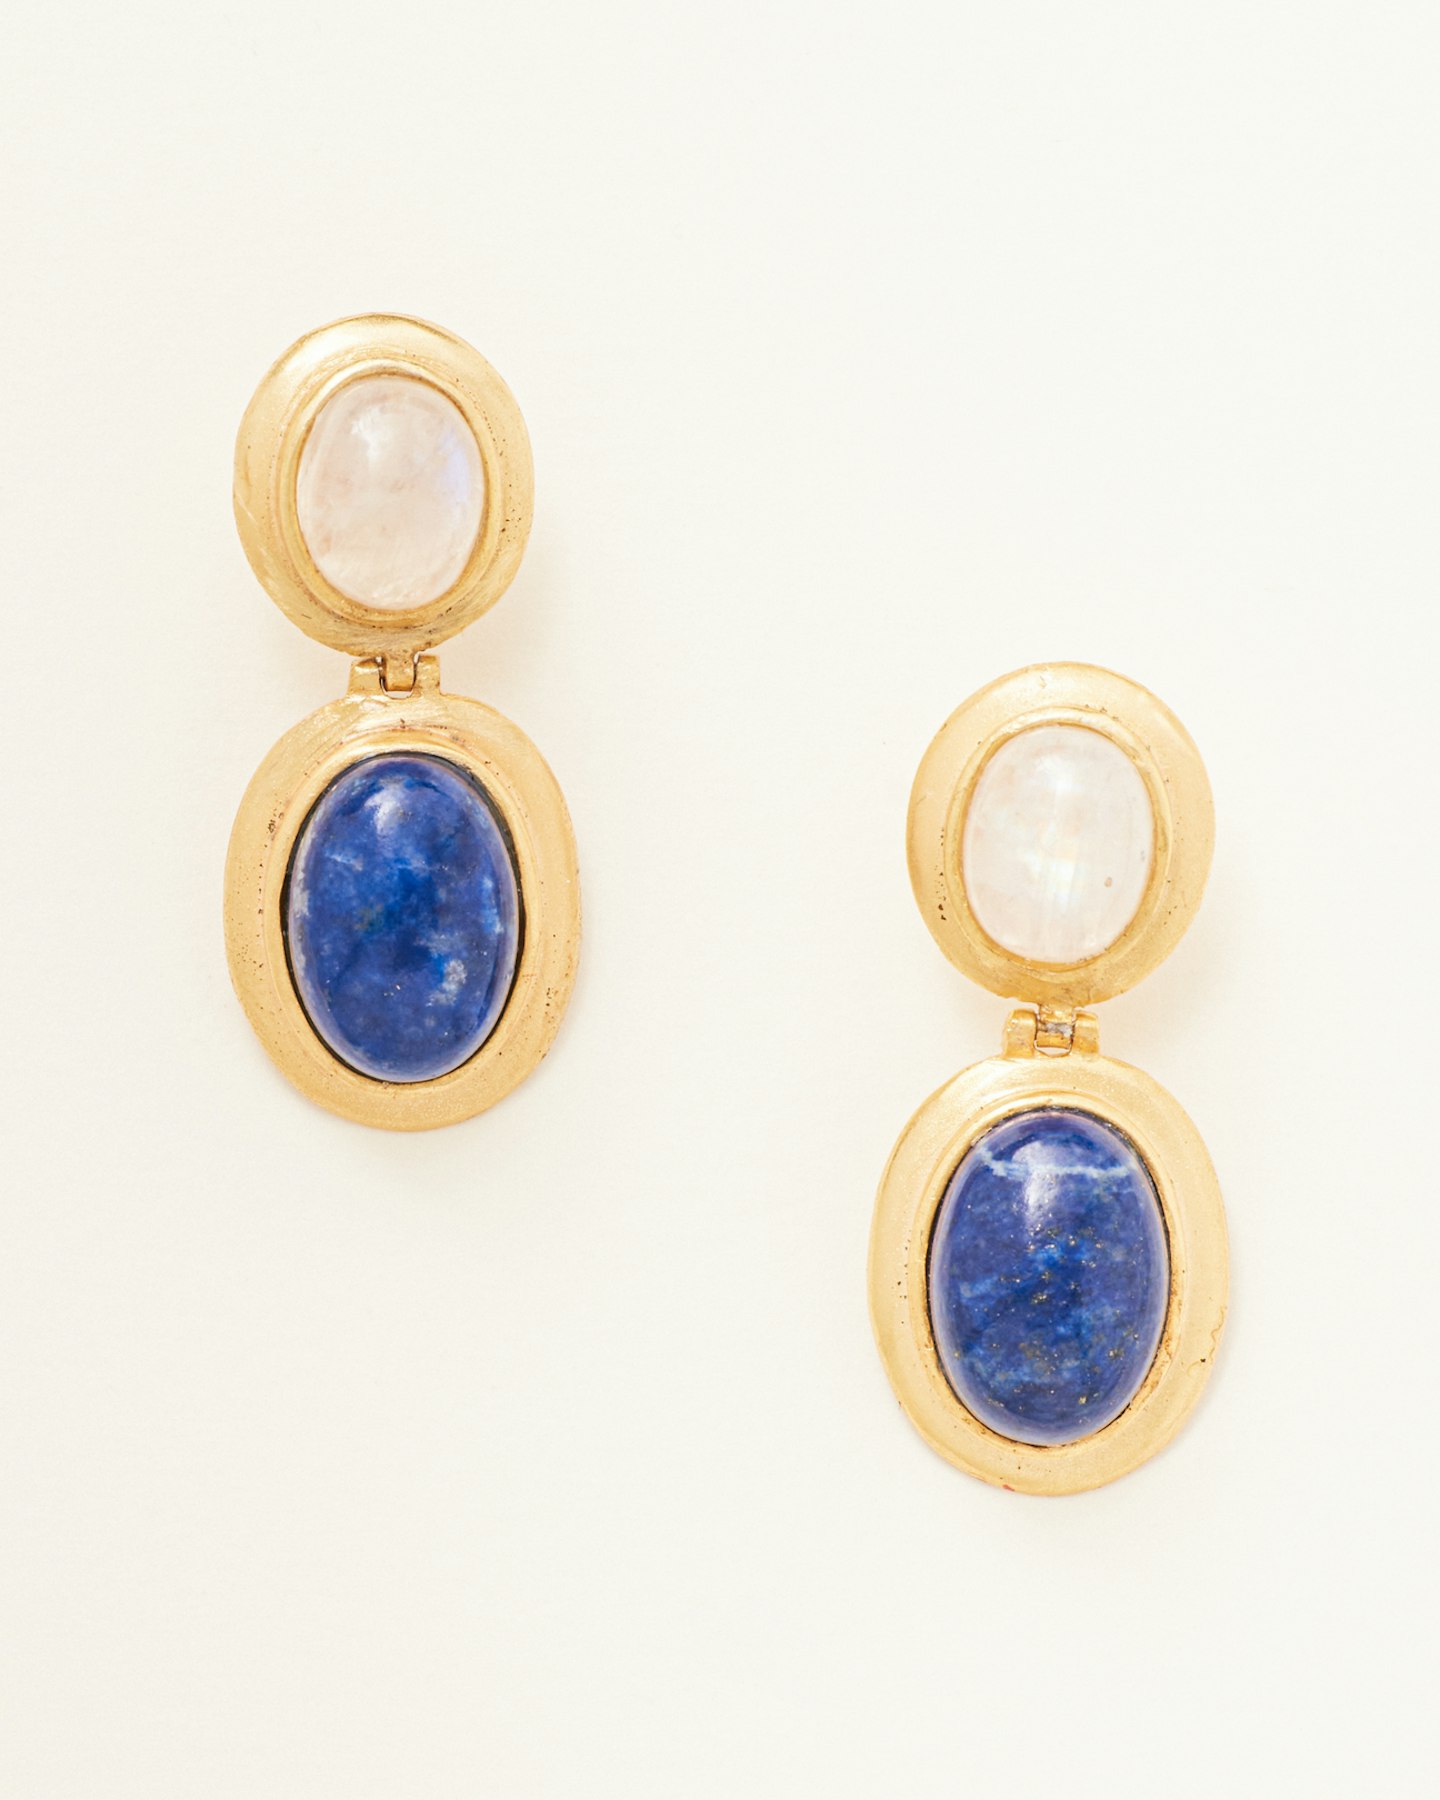 Stella Earrings With Lapis And Moonstone